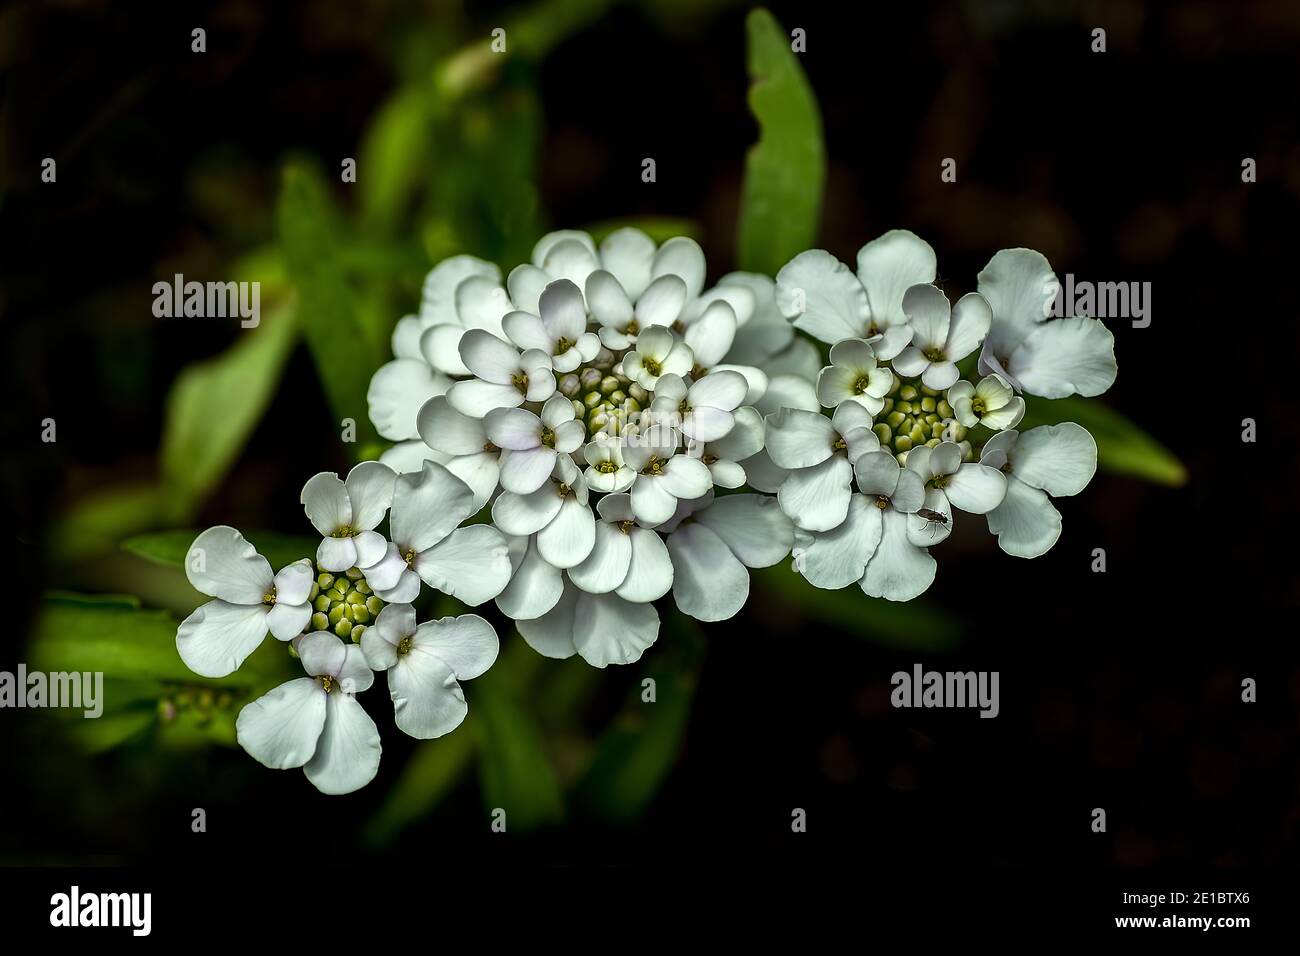 White Candytuft flowers Stock Photo